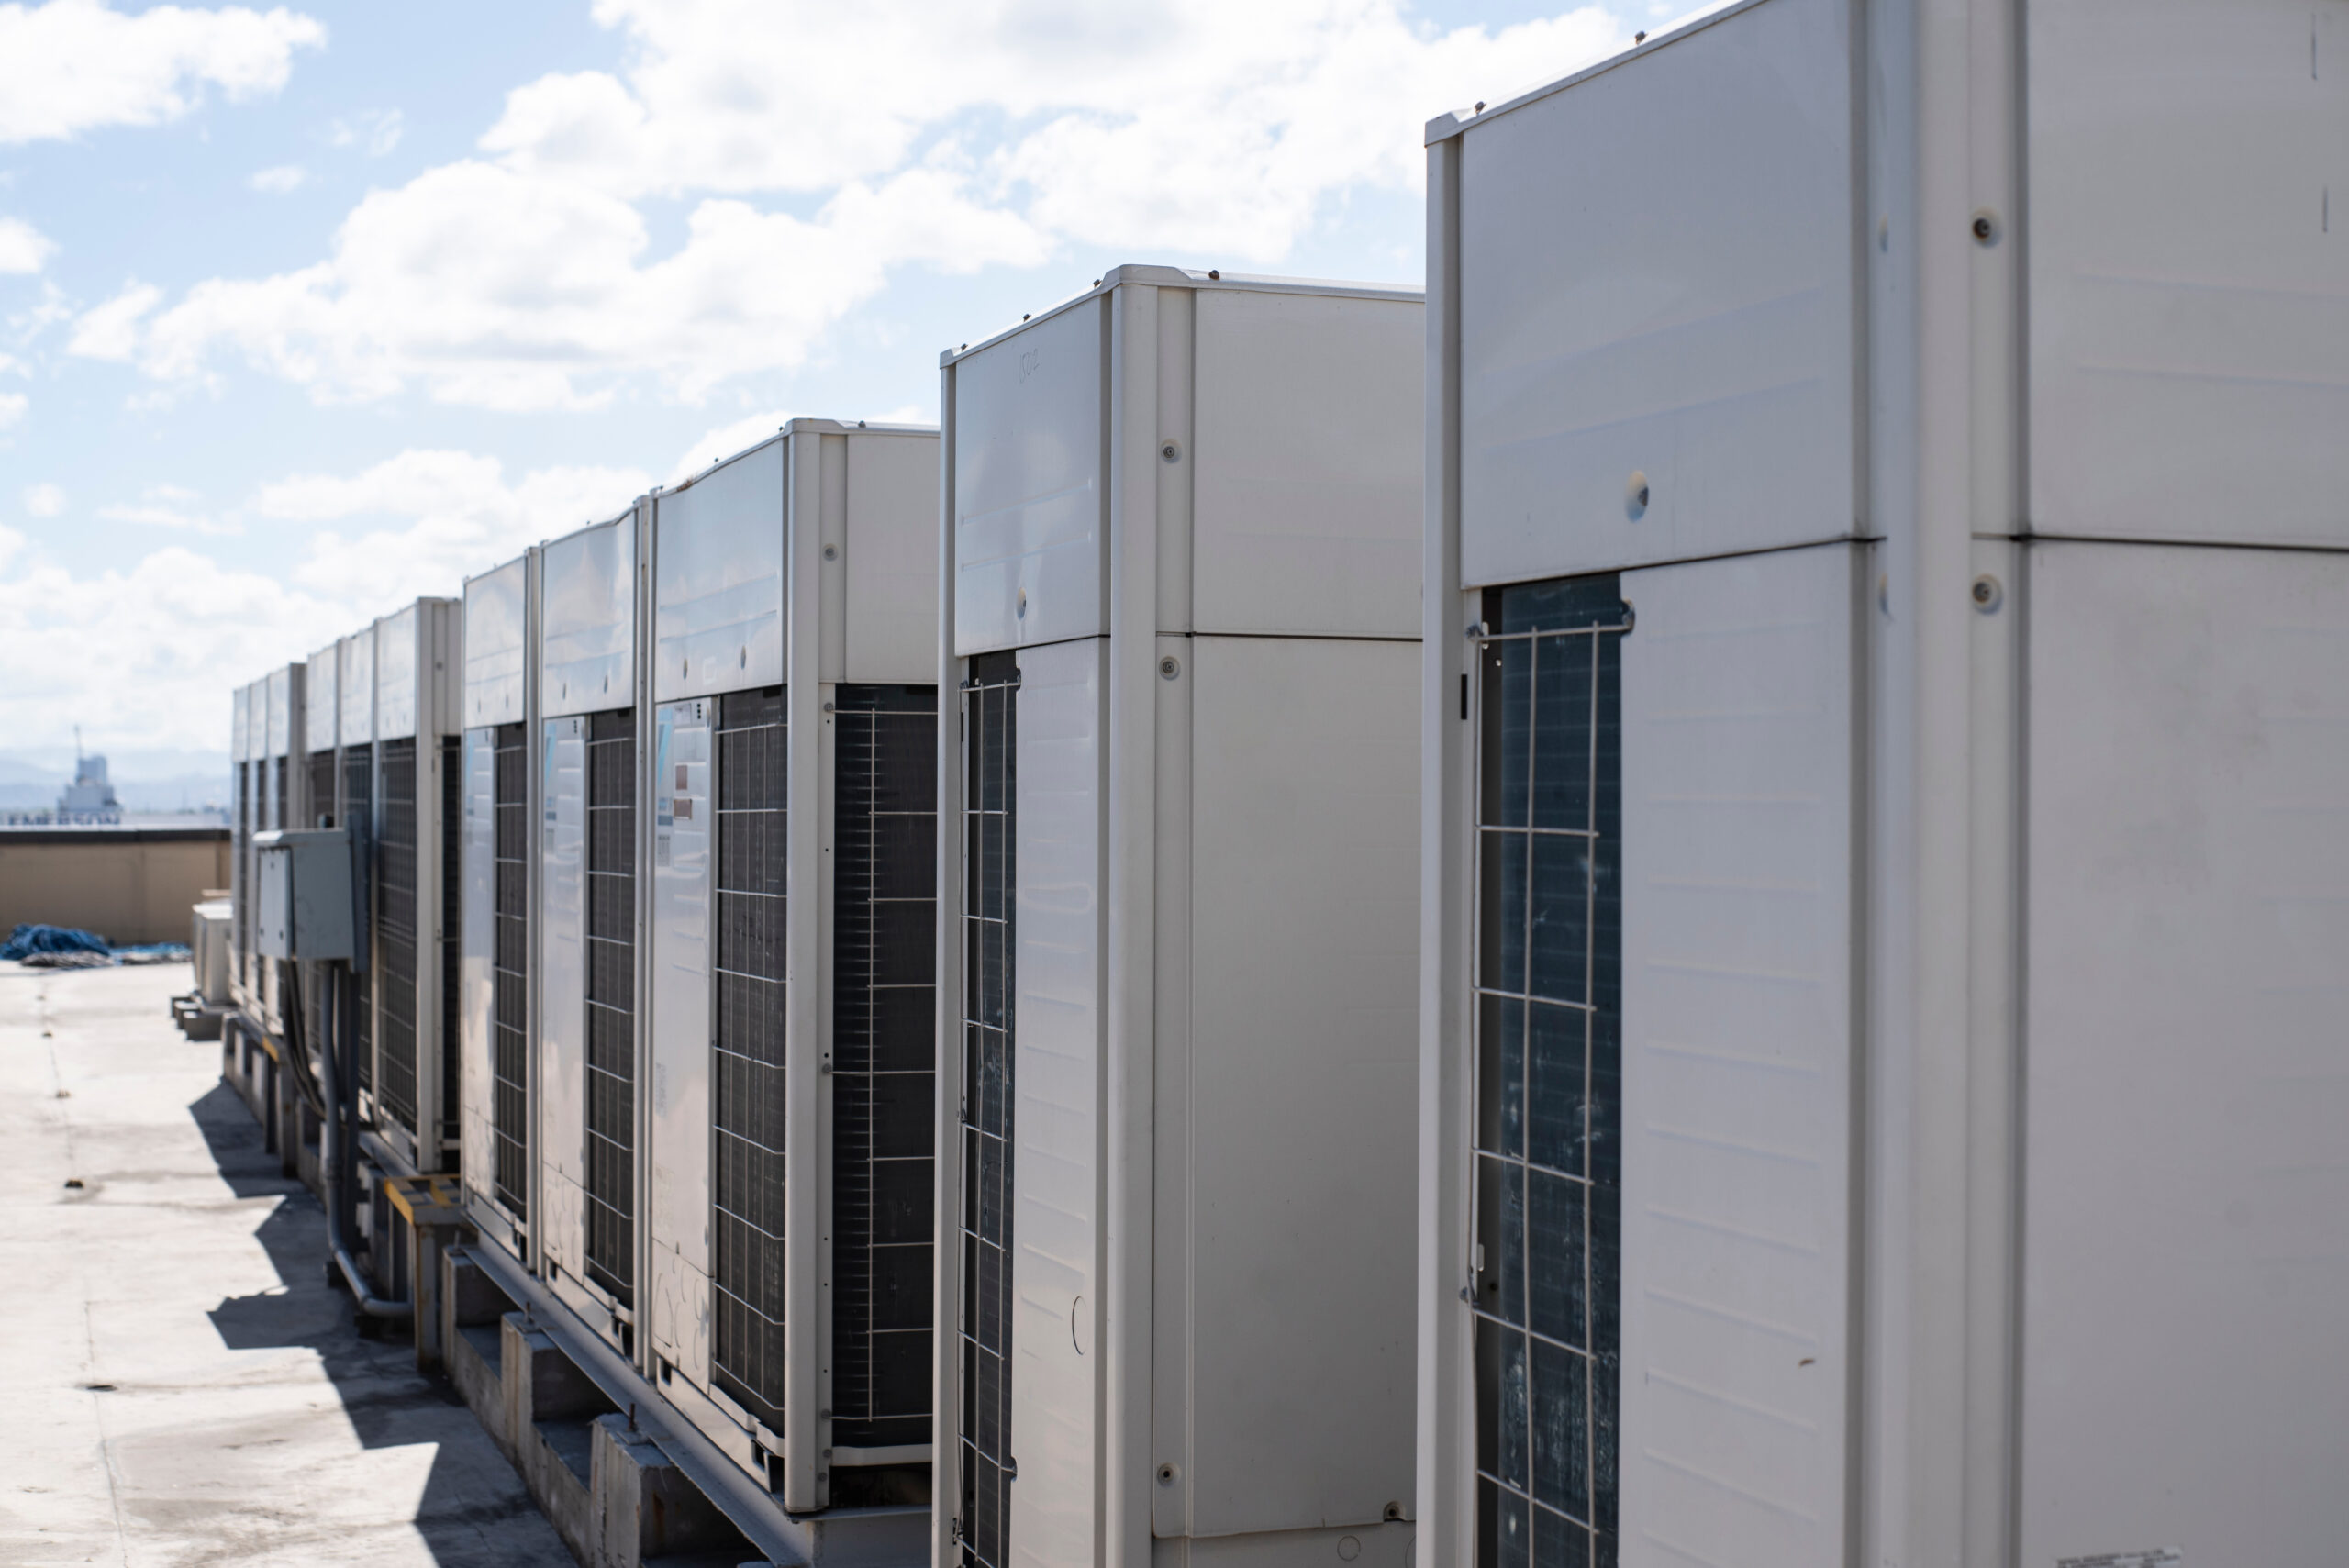 Rows of rooftop HVACs on the roofdeck of an office tower. VRF air conditioner for commercial buildings